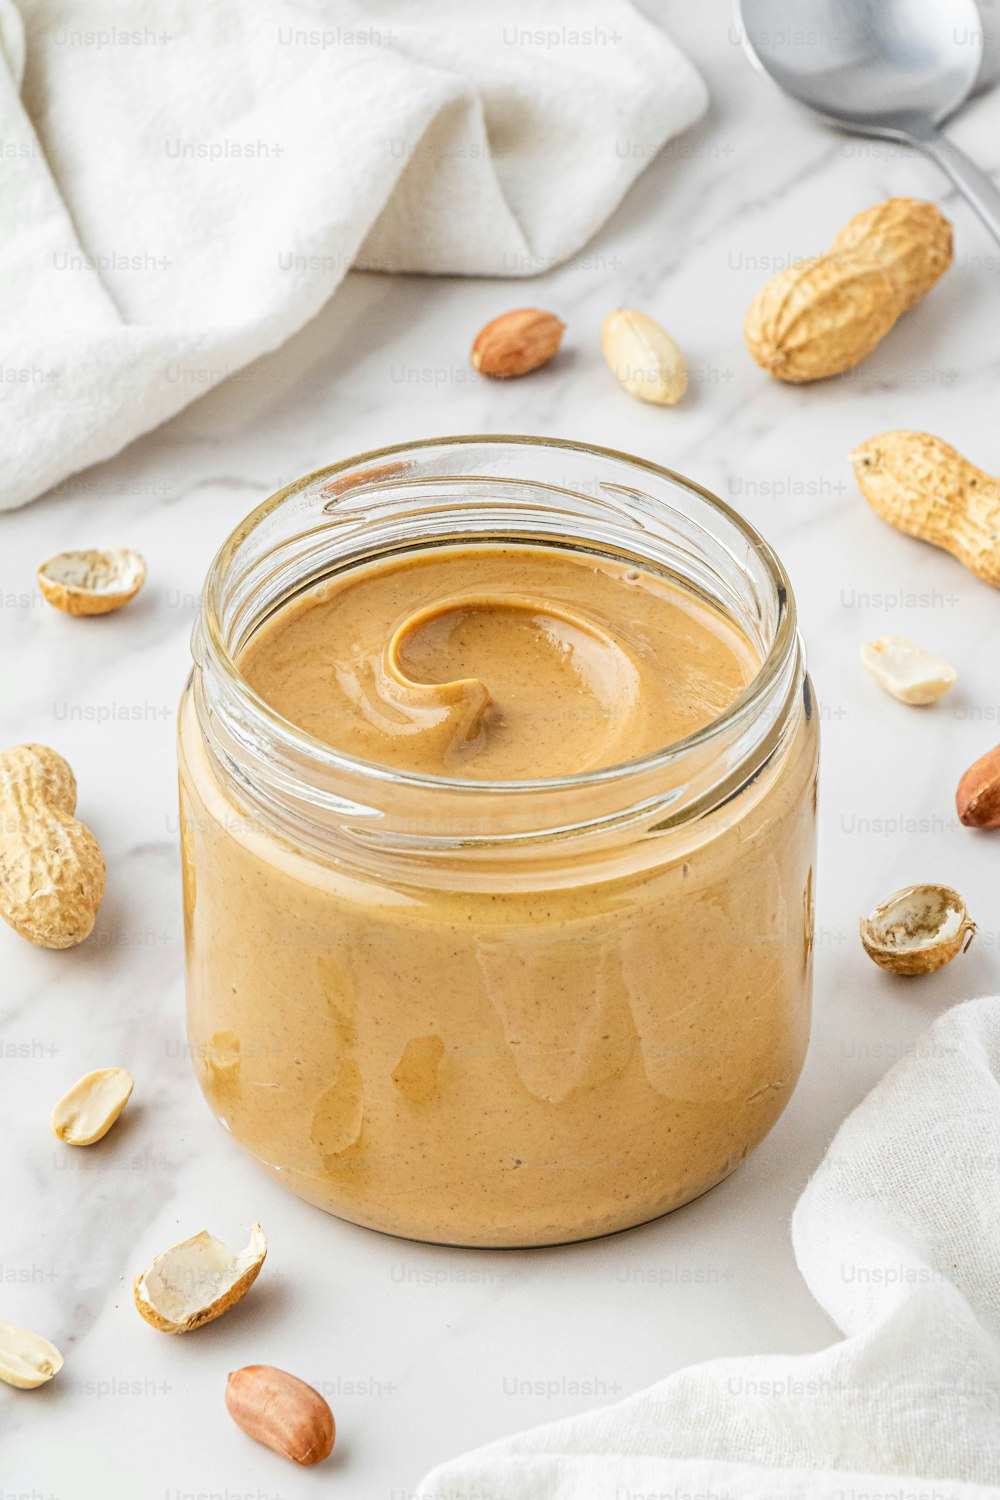 a jar filled with peanut butter next to a spoon